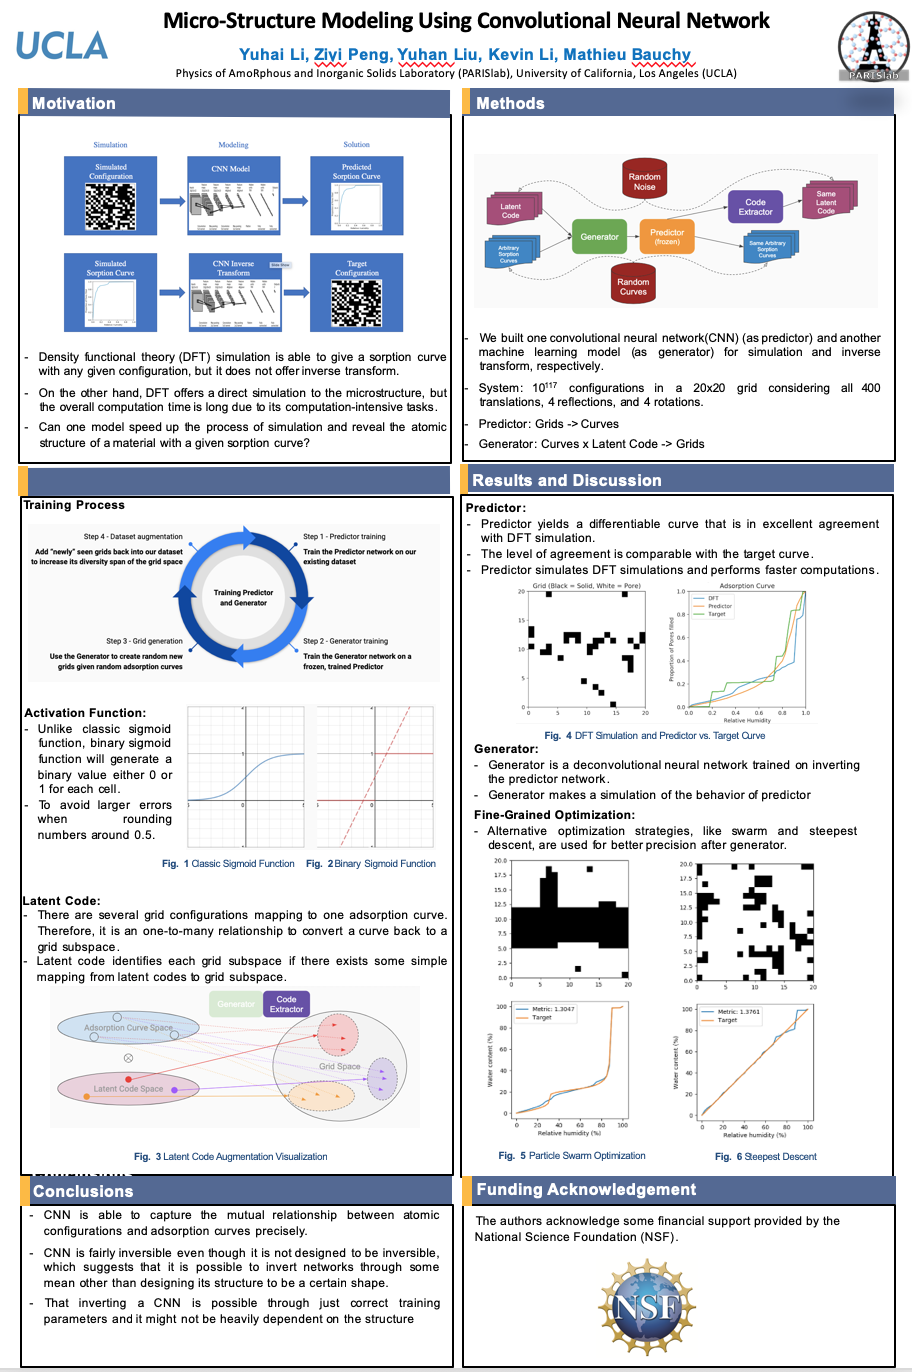 Micro-Structure Modeling Using Conventional Neural Network Poster